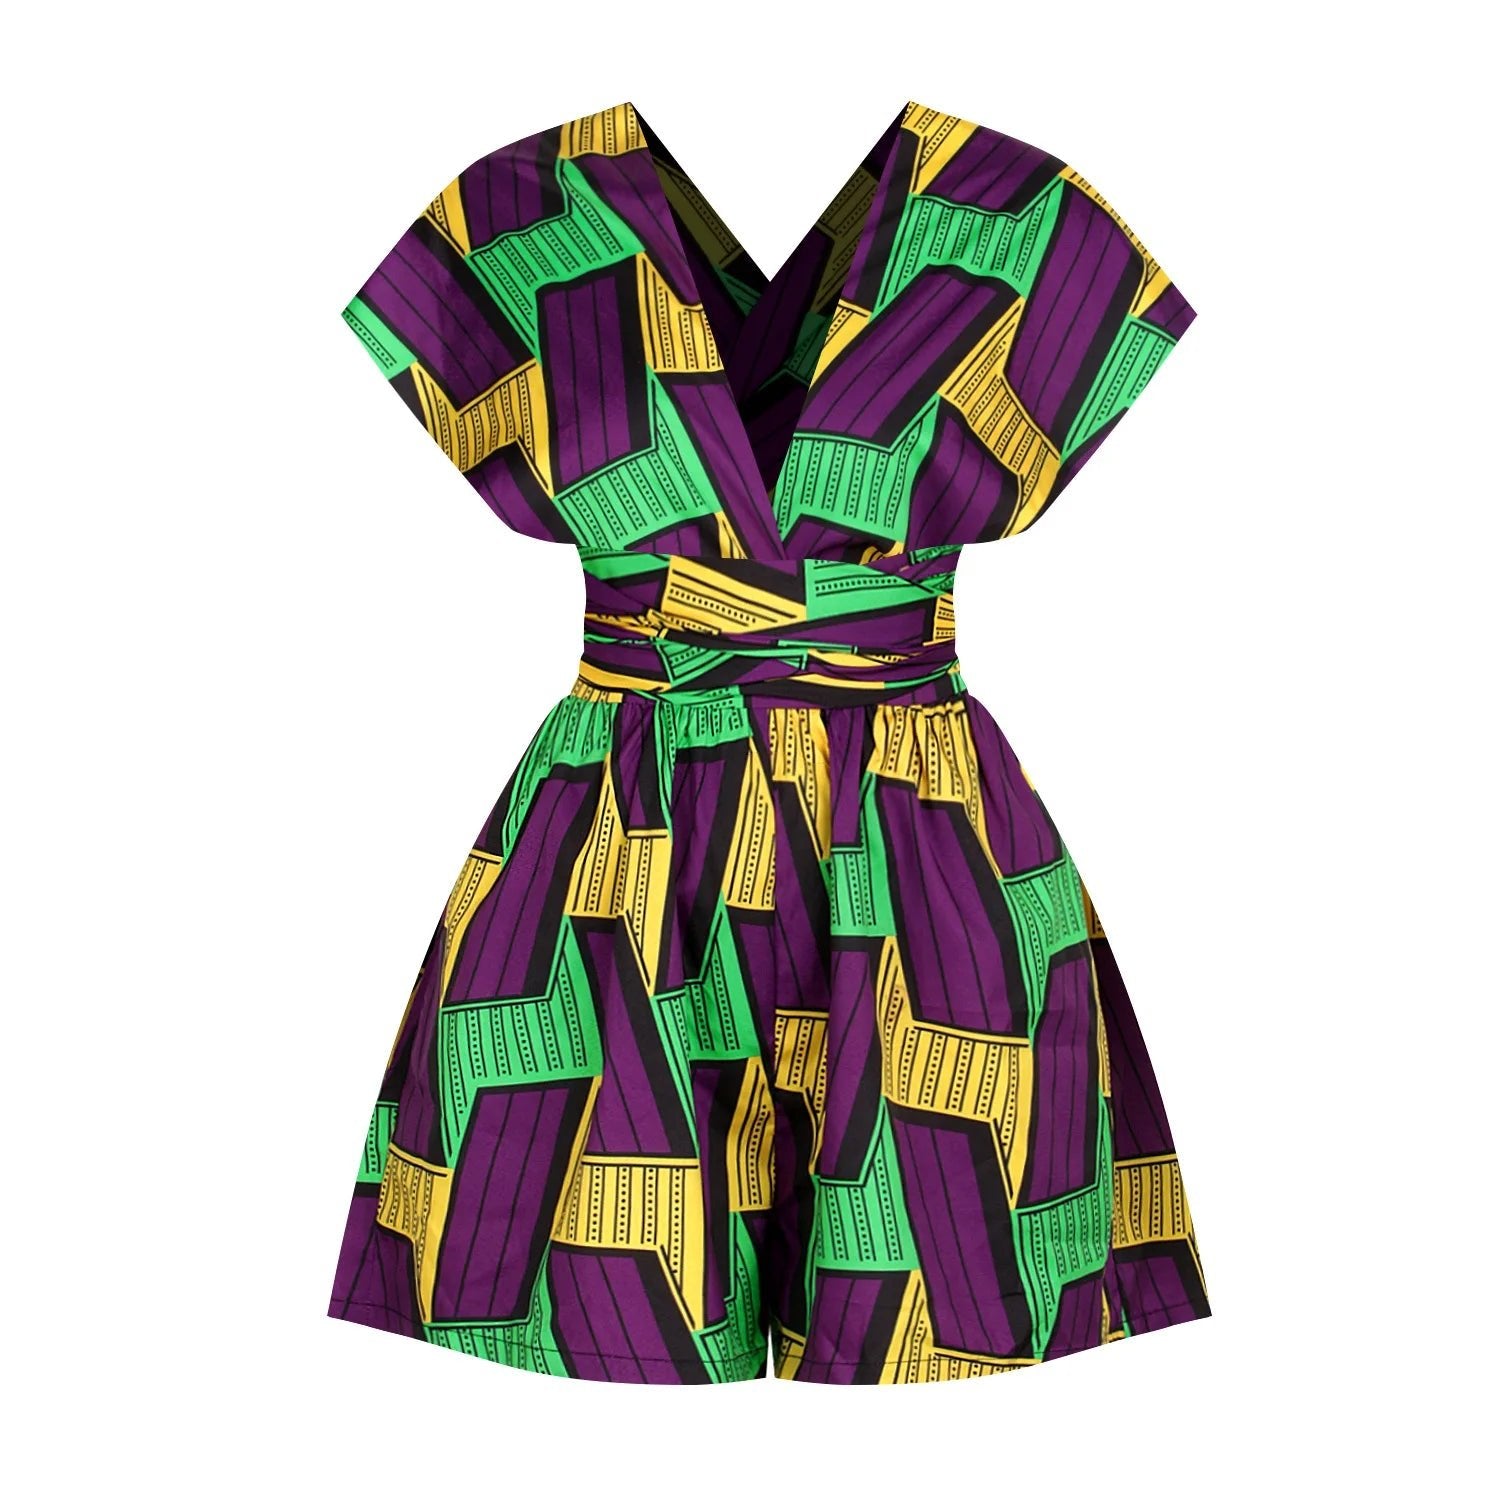 Vintage Vibes: Women's African Dashiki Retro Print Jumpsuit & Mini Skirt Shorts Party Fashion - Flexi Africa - Free Delivery Worldwide only at www.flexiafrica.com